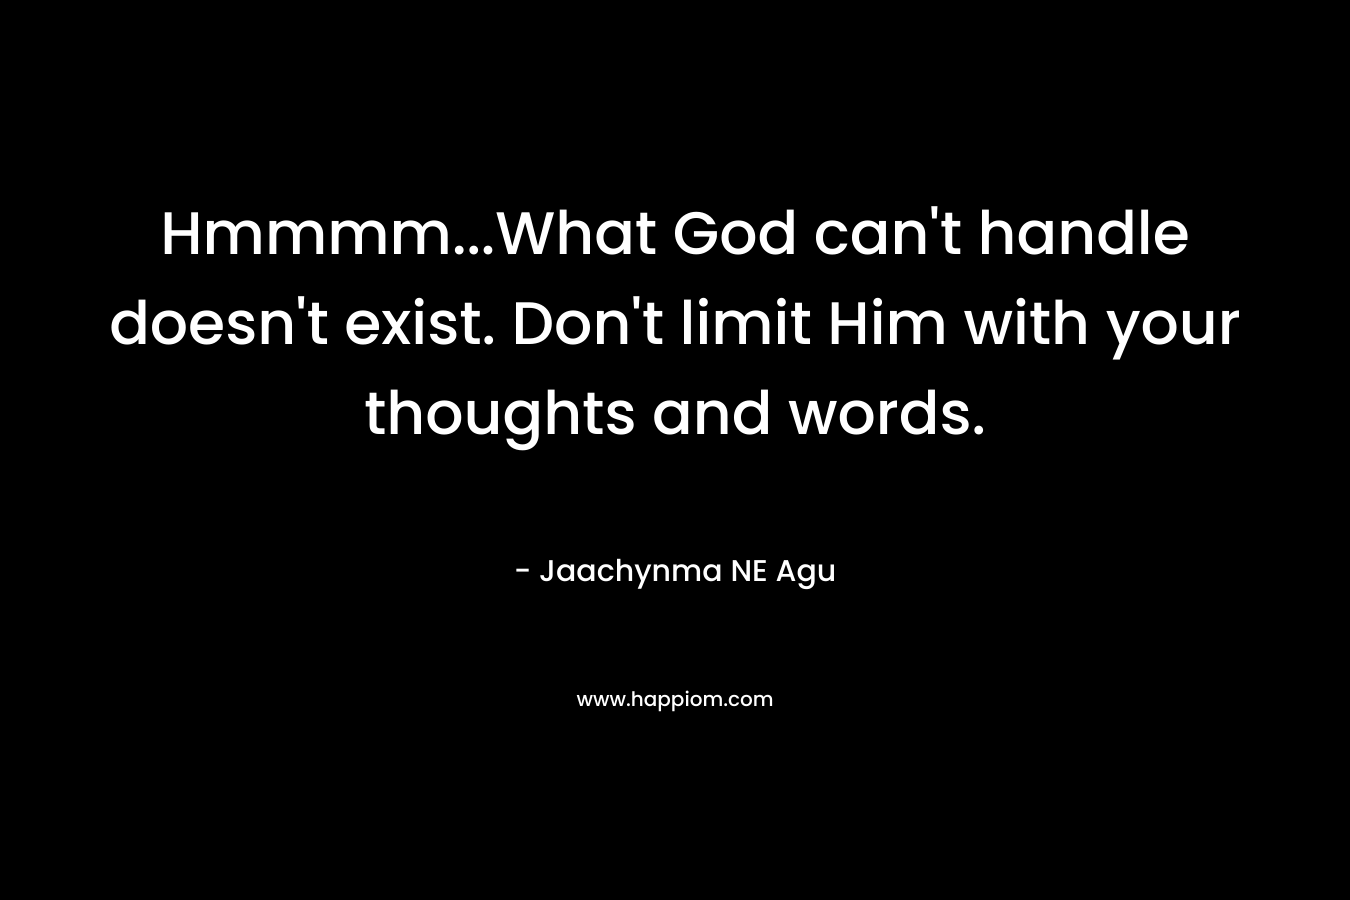 Hmmmm...What God can't handle doesn't exist. Don't limit Him with your thoughts and words.